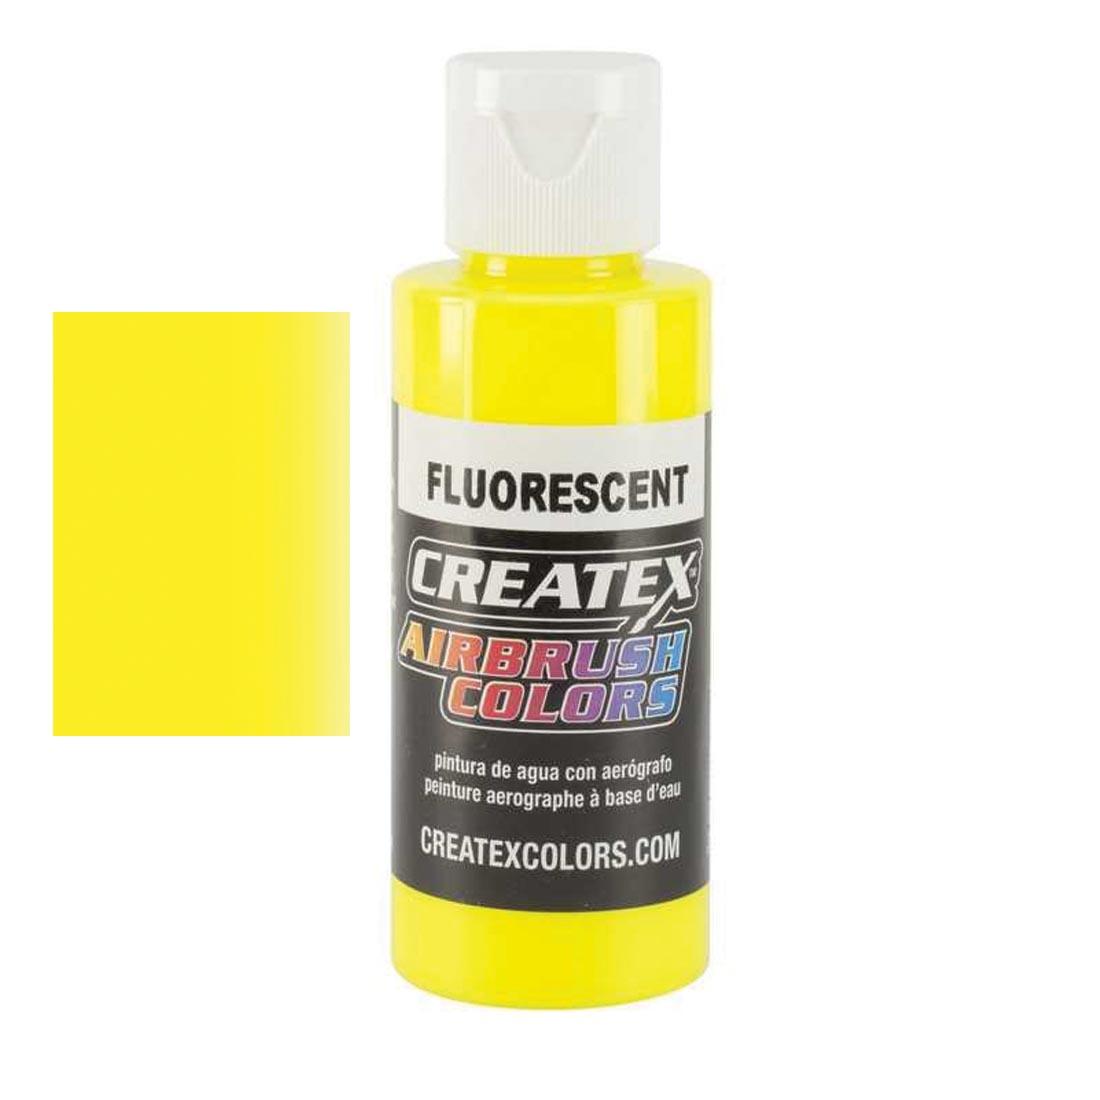 Bottle of Createx Airbrush Color Beside Fluorescent Yellow Color Swatch